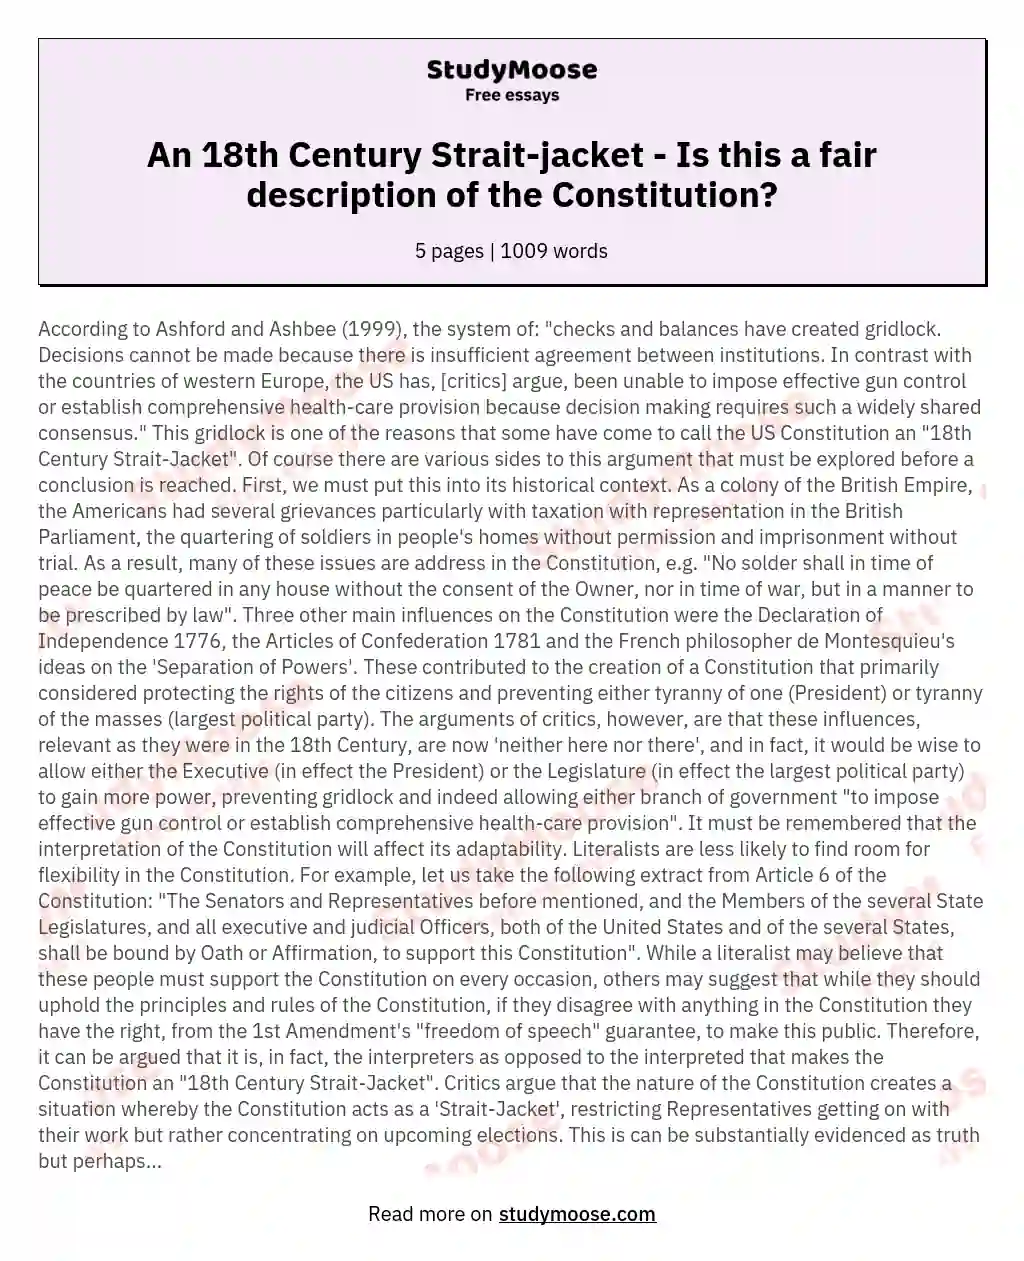 An 18th Century Strait-jacket - Is this a fair description of the Constitution?